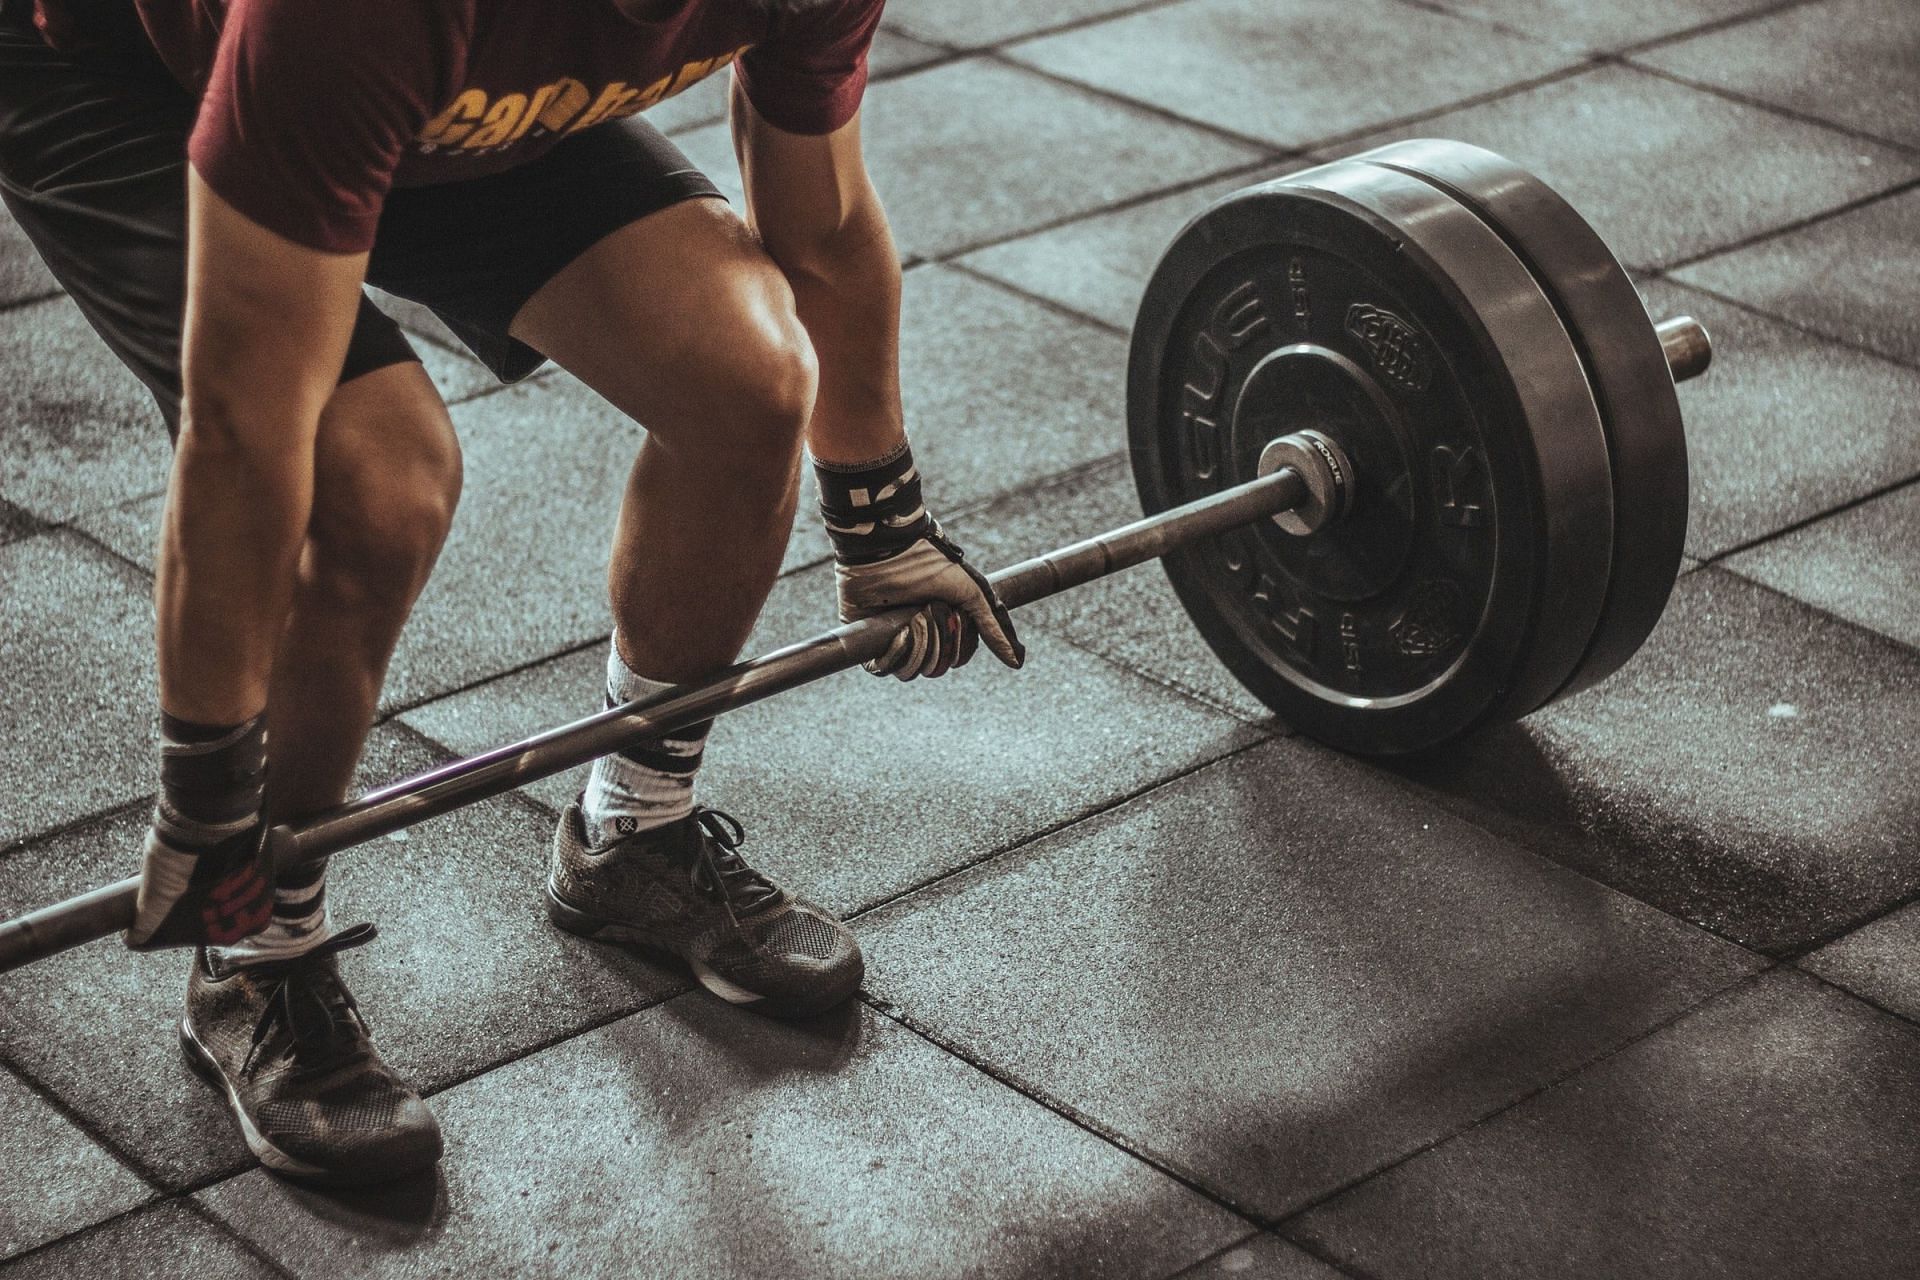 Weightlifting is not good for hypertension patients. (Photo by Victor Freitas on Unsplash)